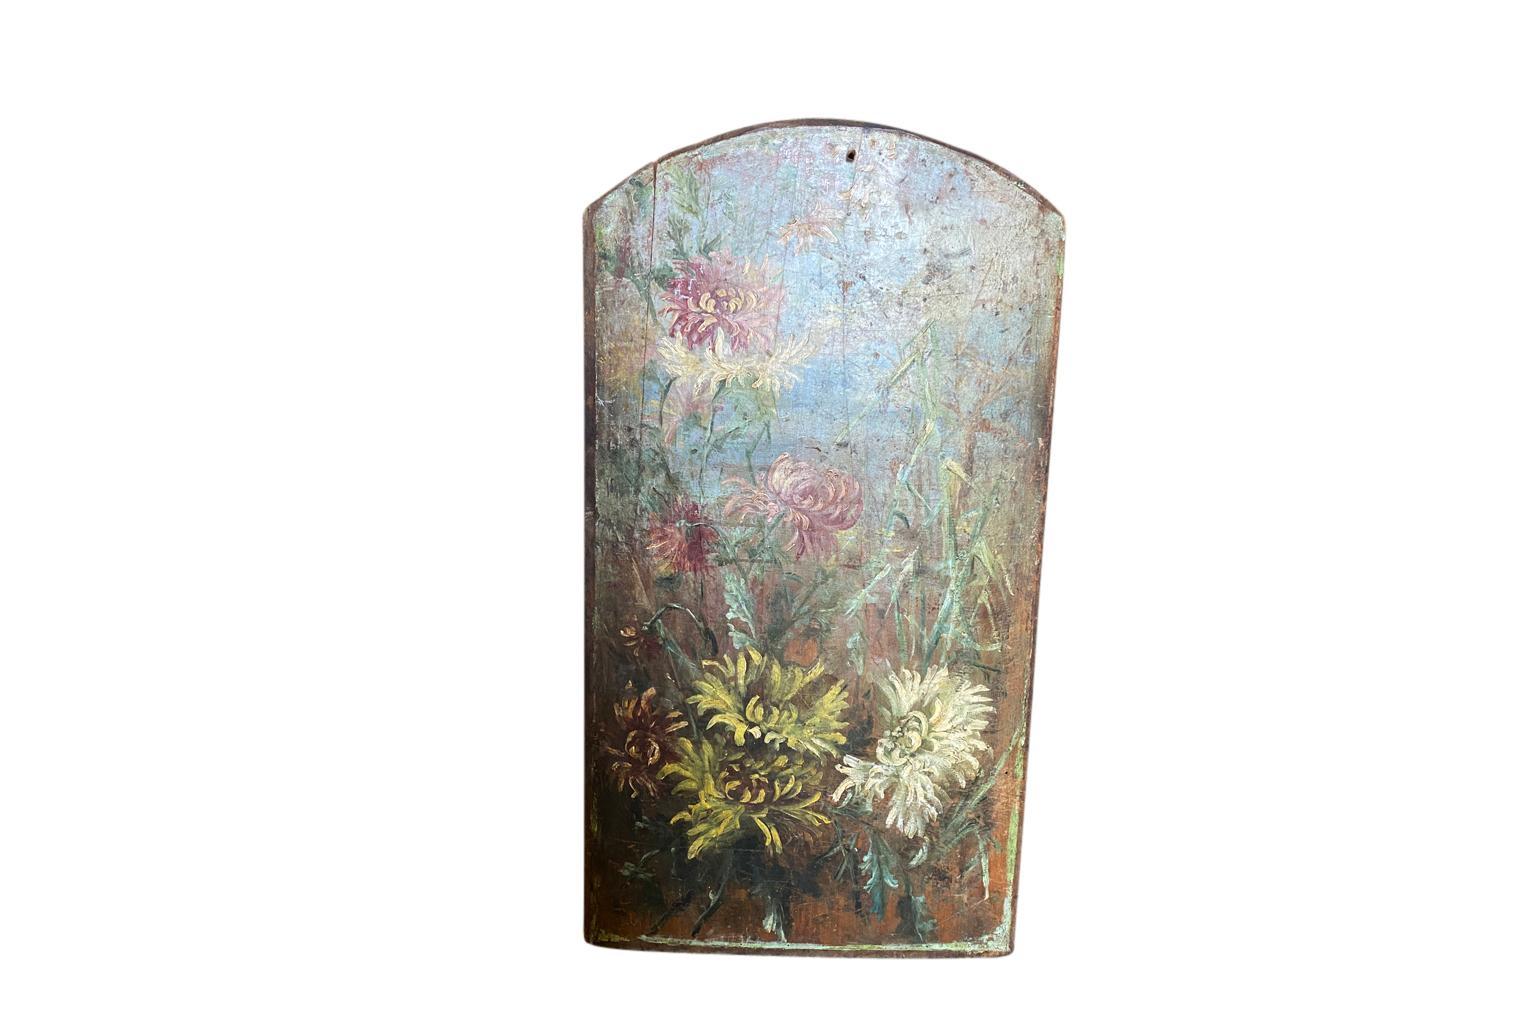 A very charming and primitive oil on board floral painting from the South of France. Lovely brushwork and texture.